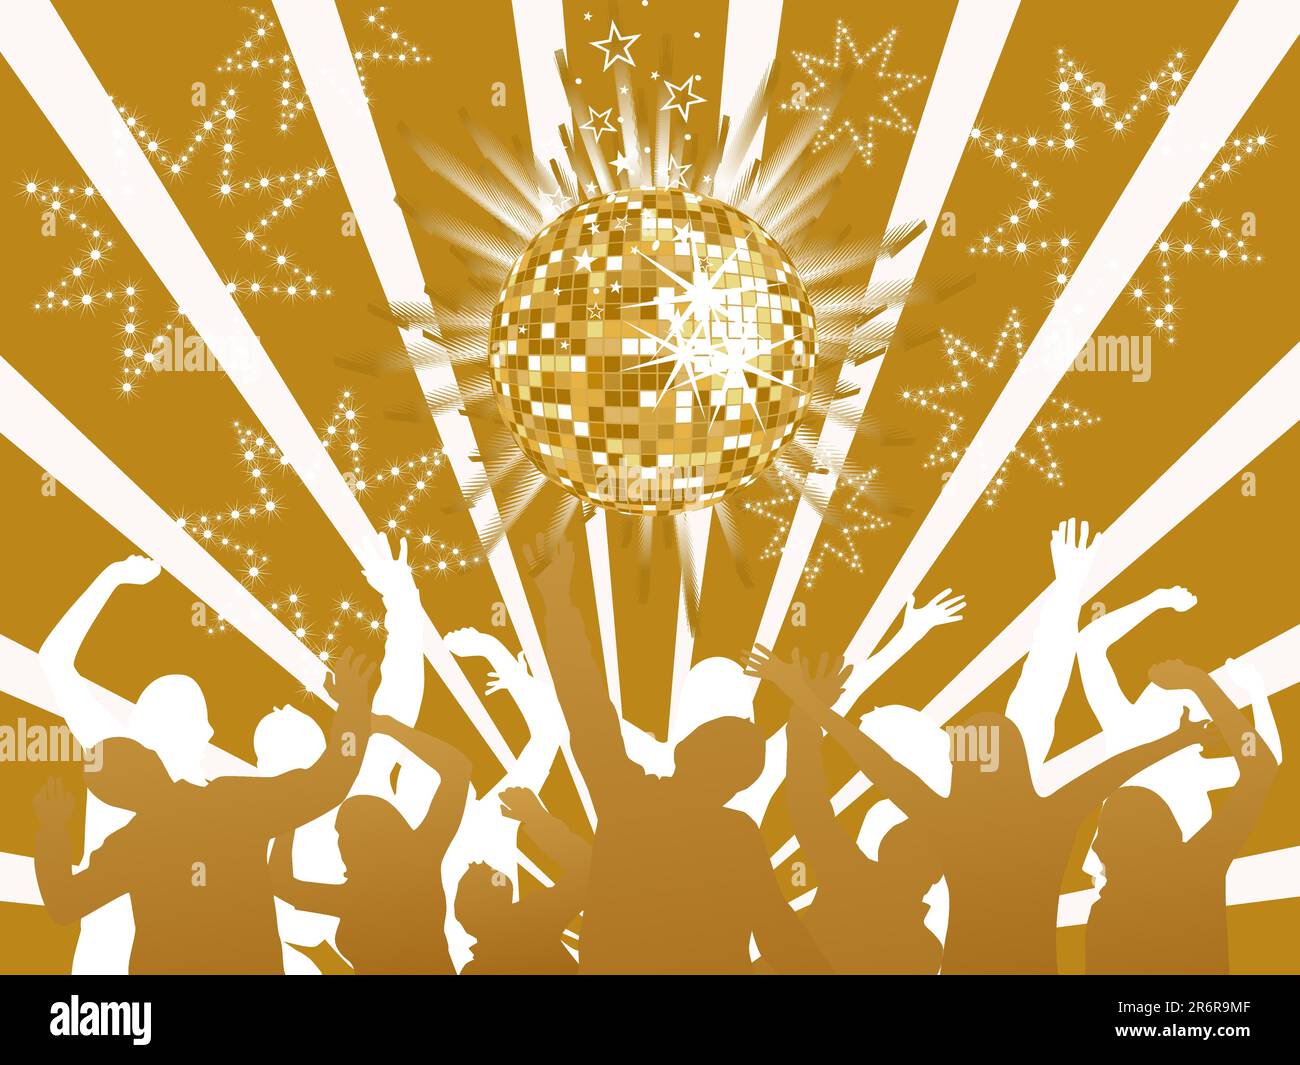 vector eps 10 illustration of dancing people silhouettes on a golden ...